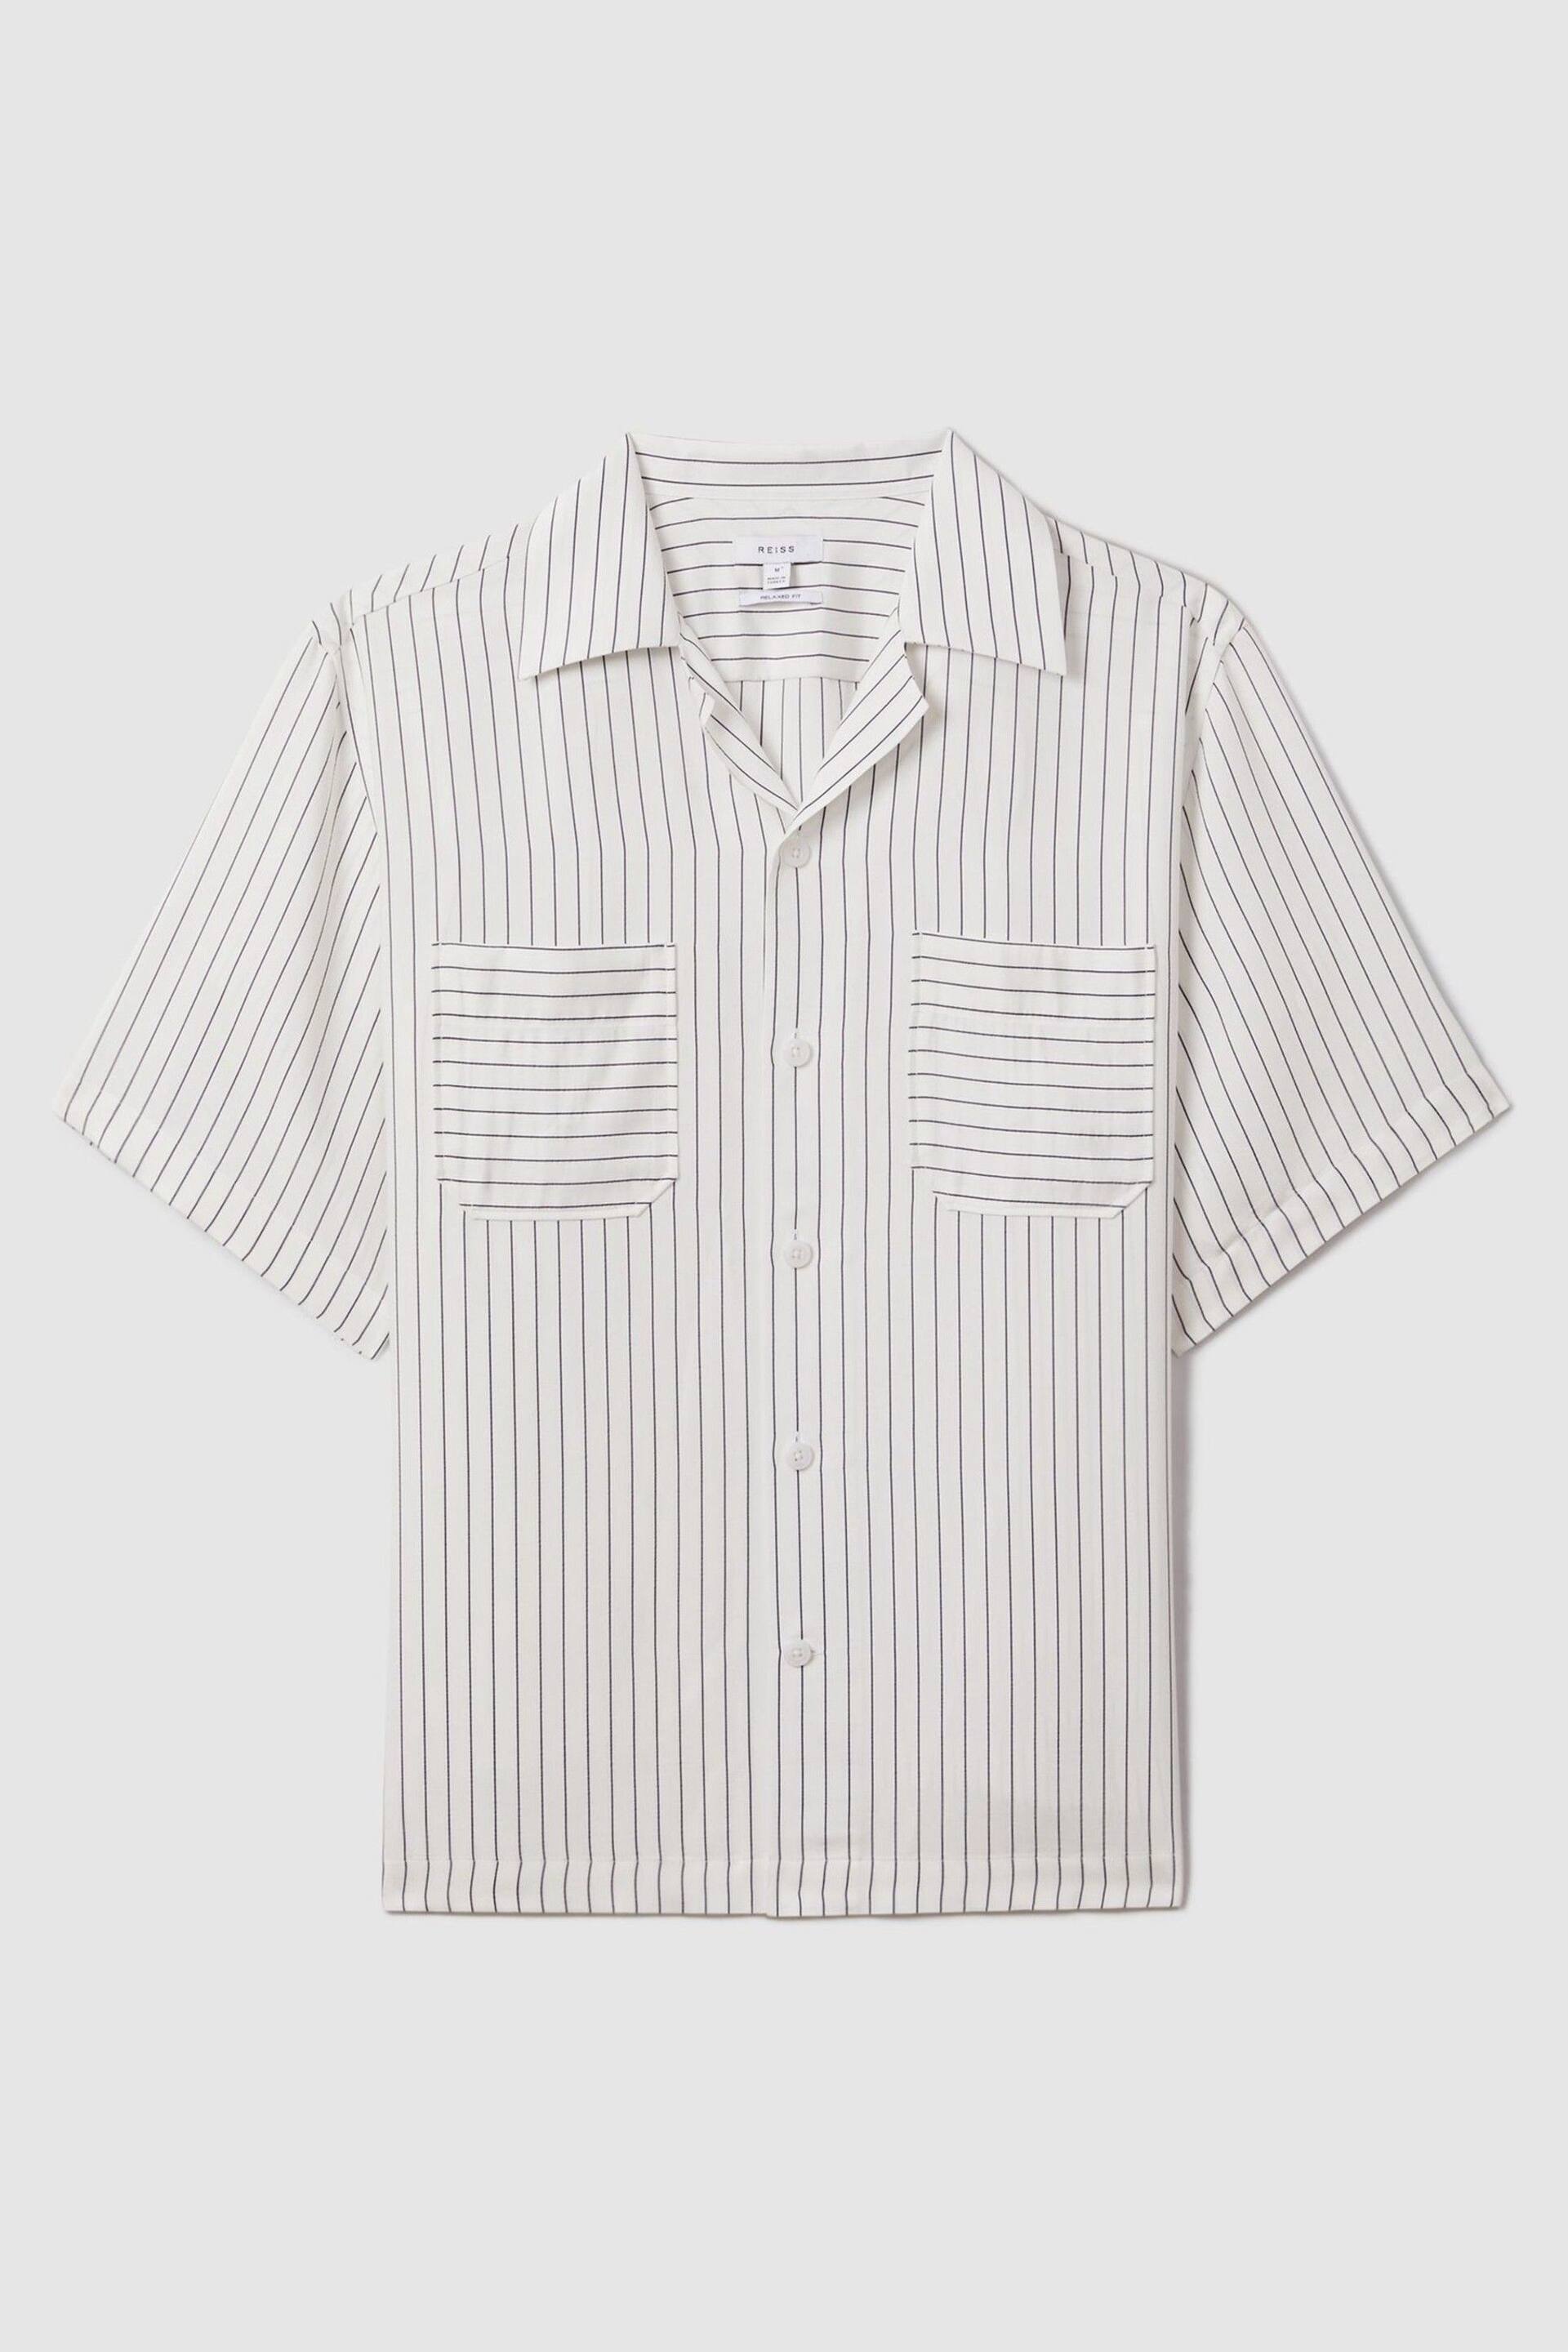 Reiss White/Navy Anchor Boxy Fit Striped Shirt - Image 2 of 6